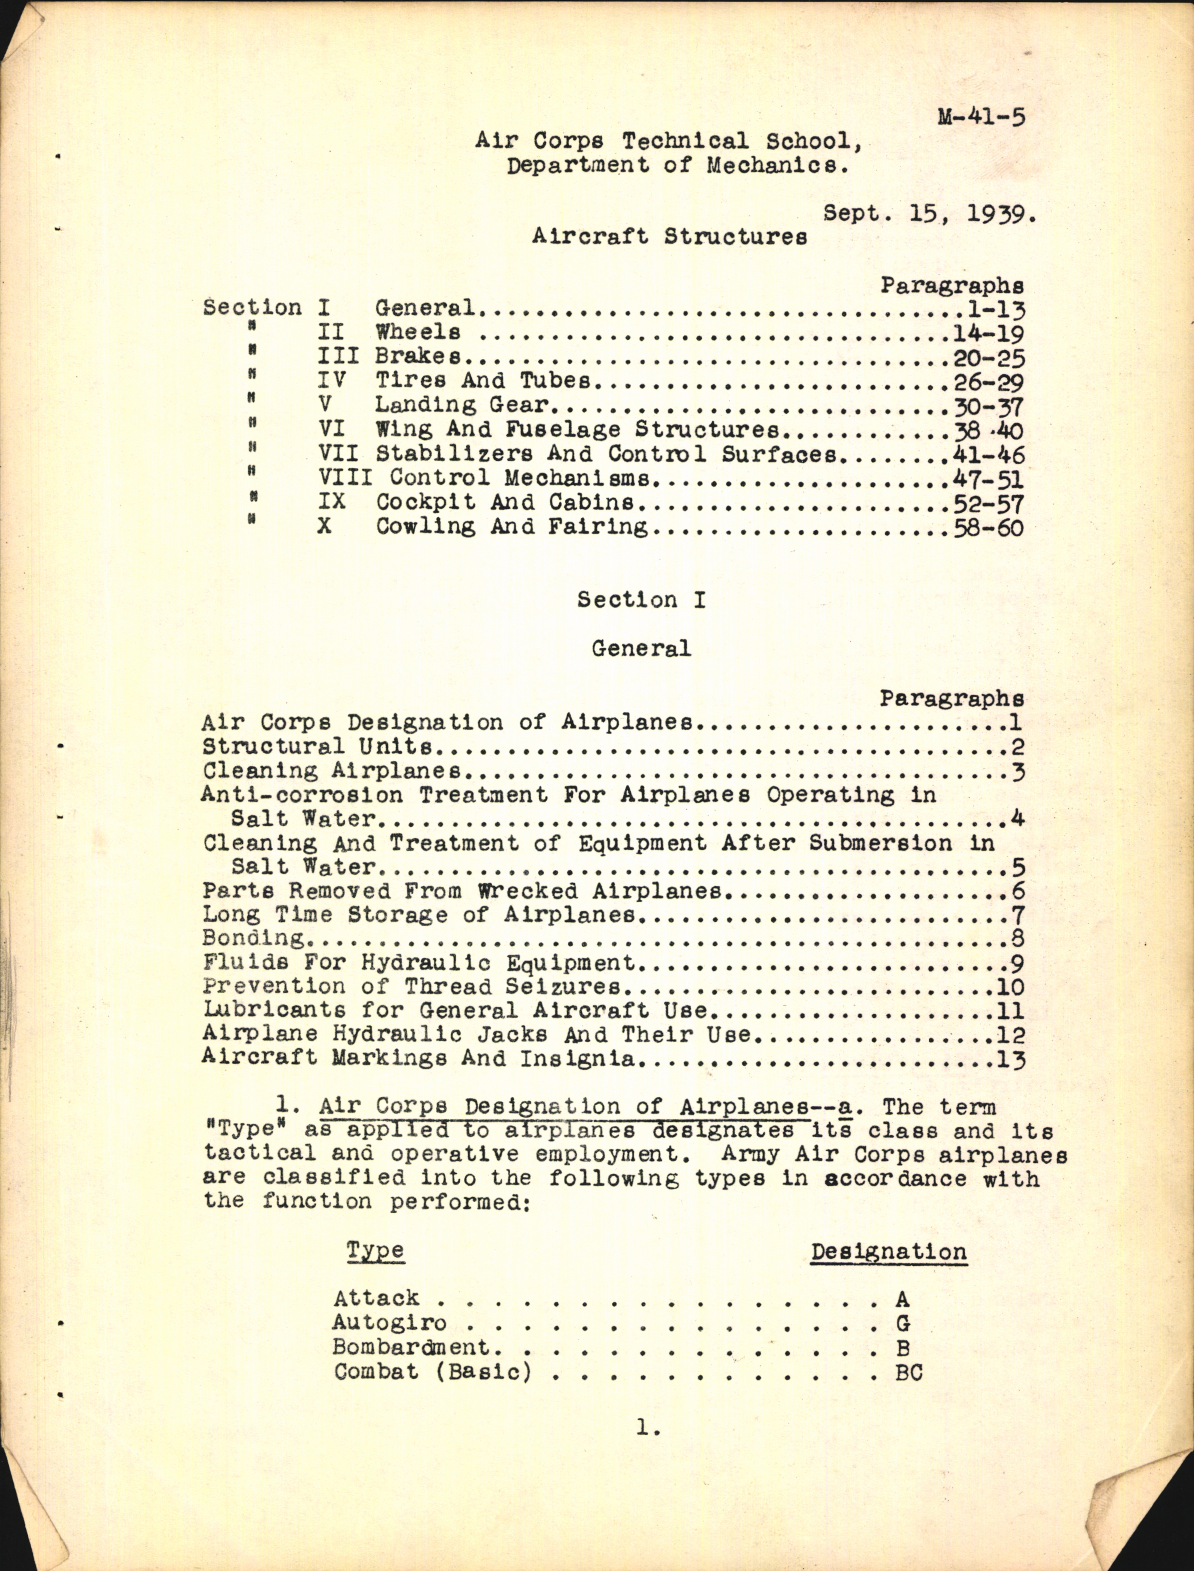 Sample page 5 from AirCorps Library document: Air Corps Technical Schools; Airplane Structures